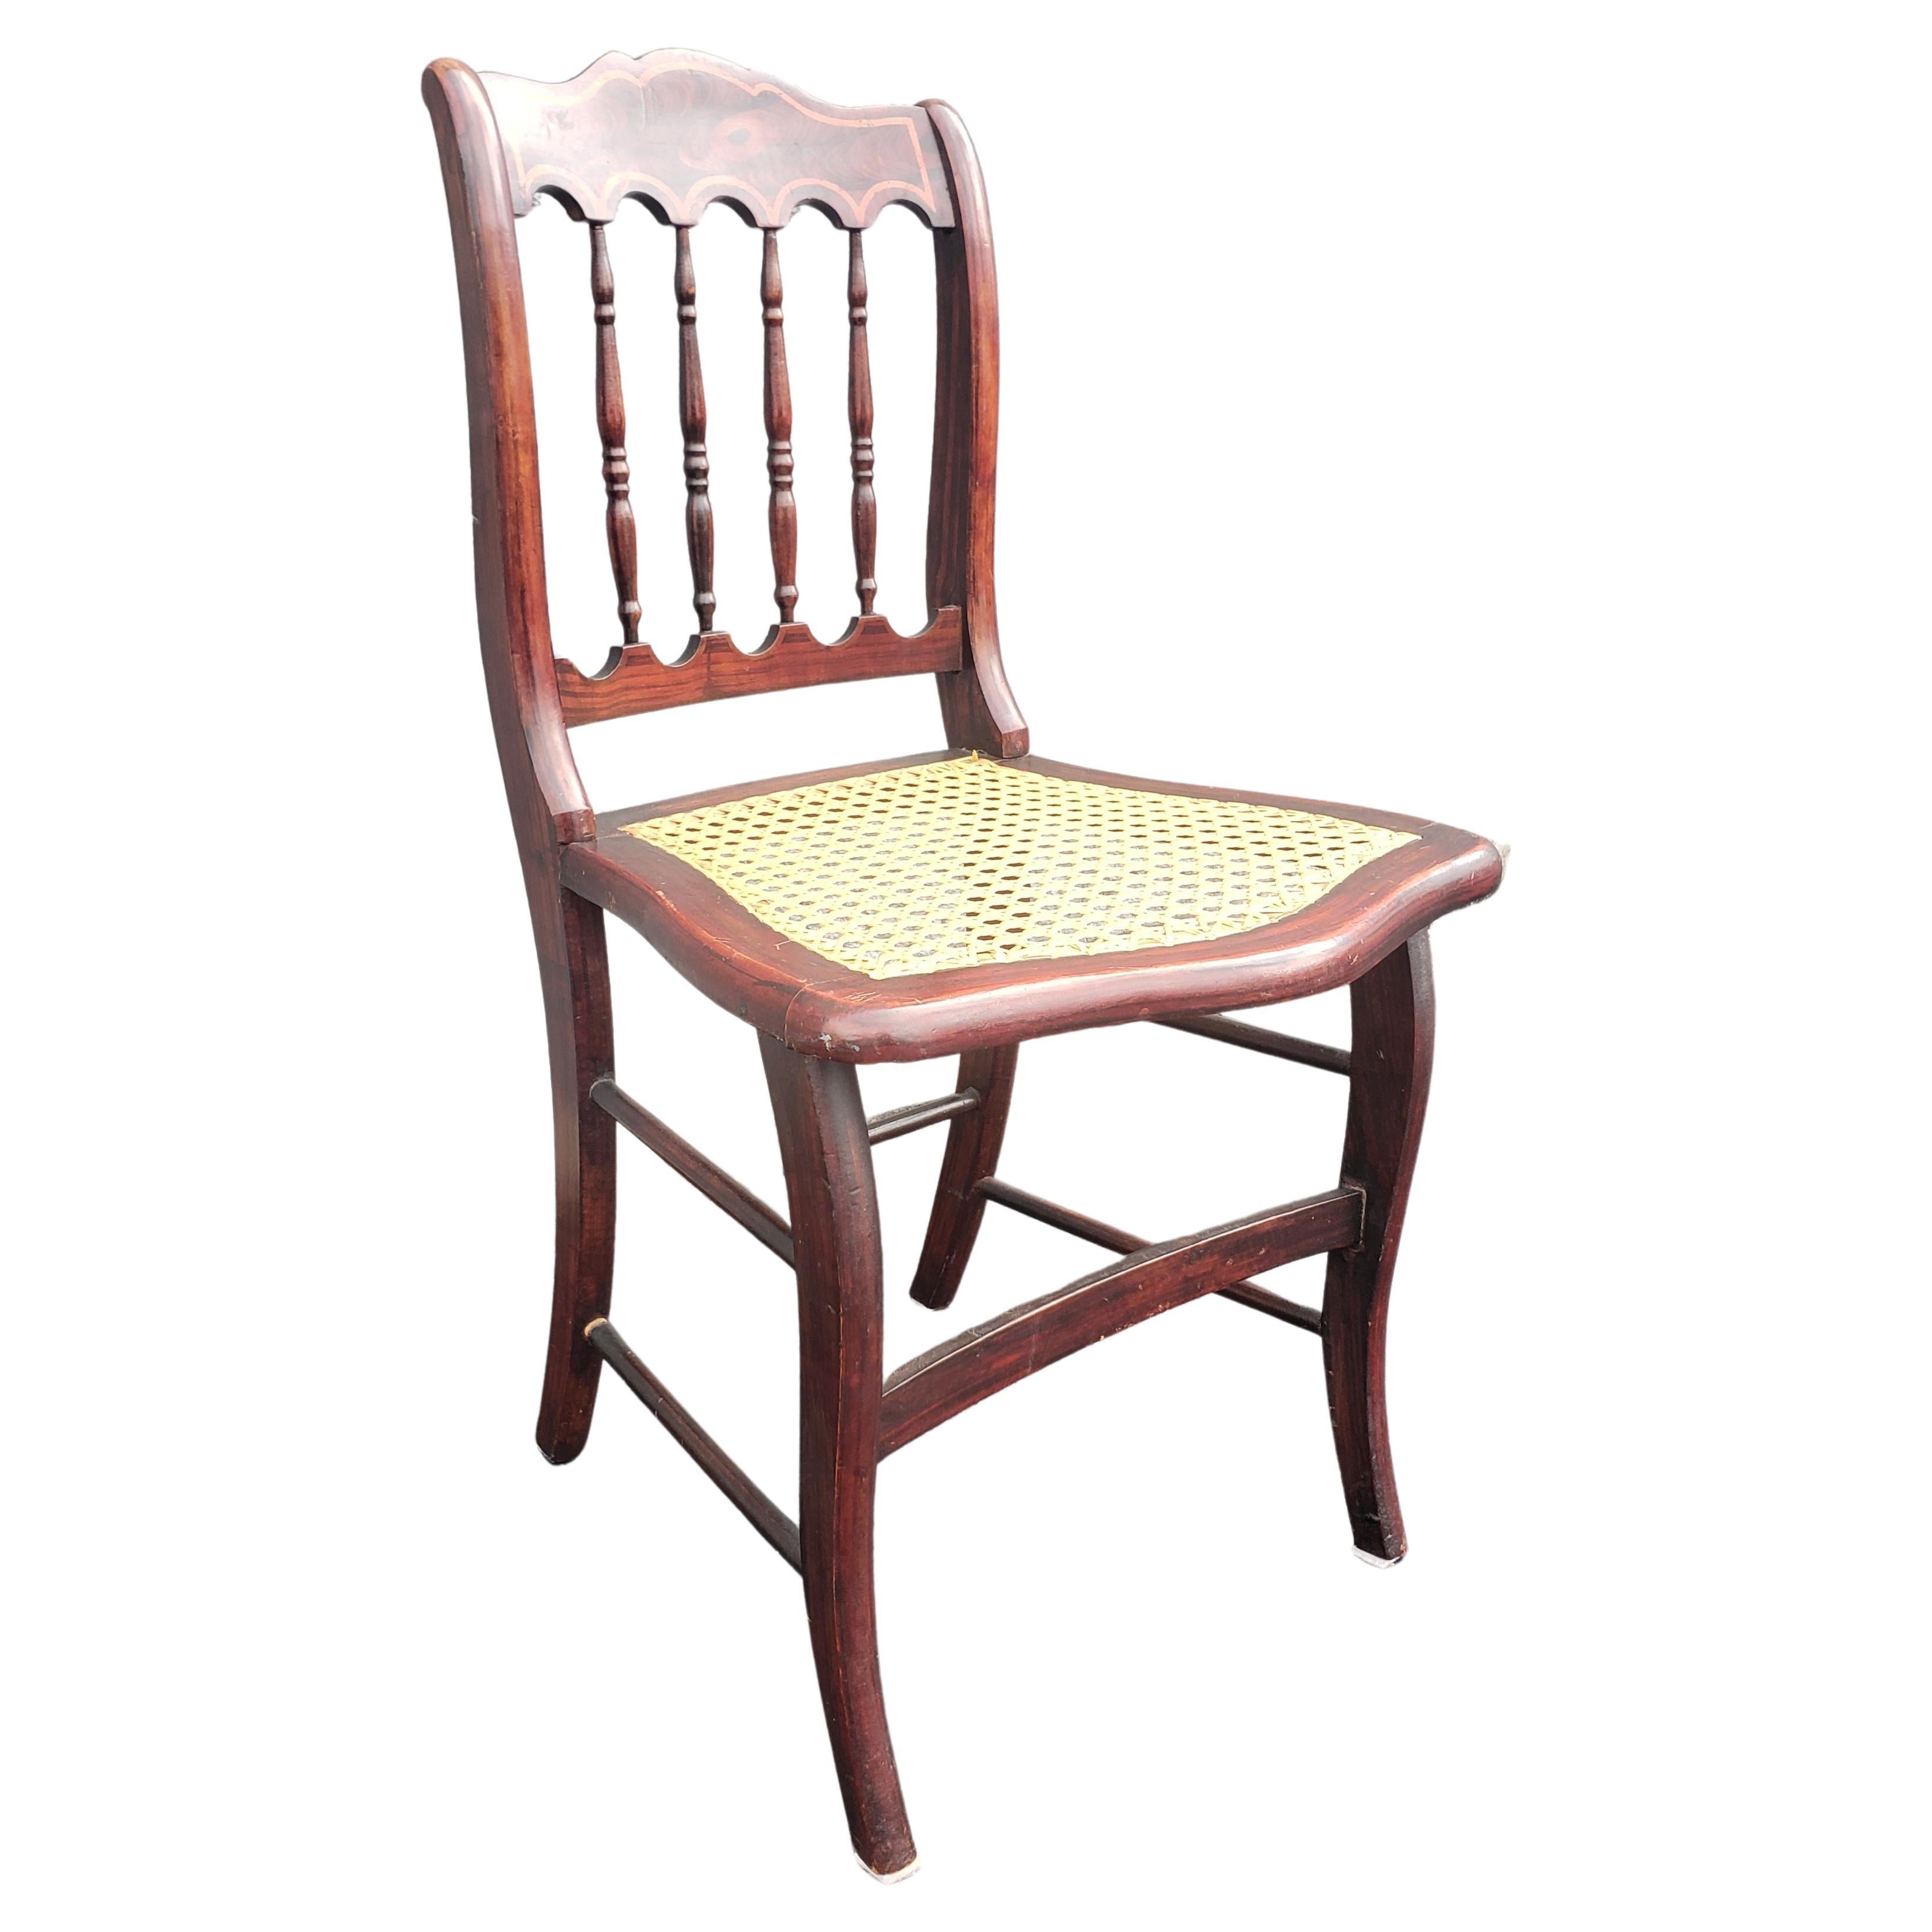 Caning Victorian American Flame Mahogany with Inlays Spindle Back and Cane Seat Chair For Sale